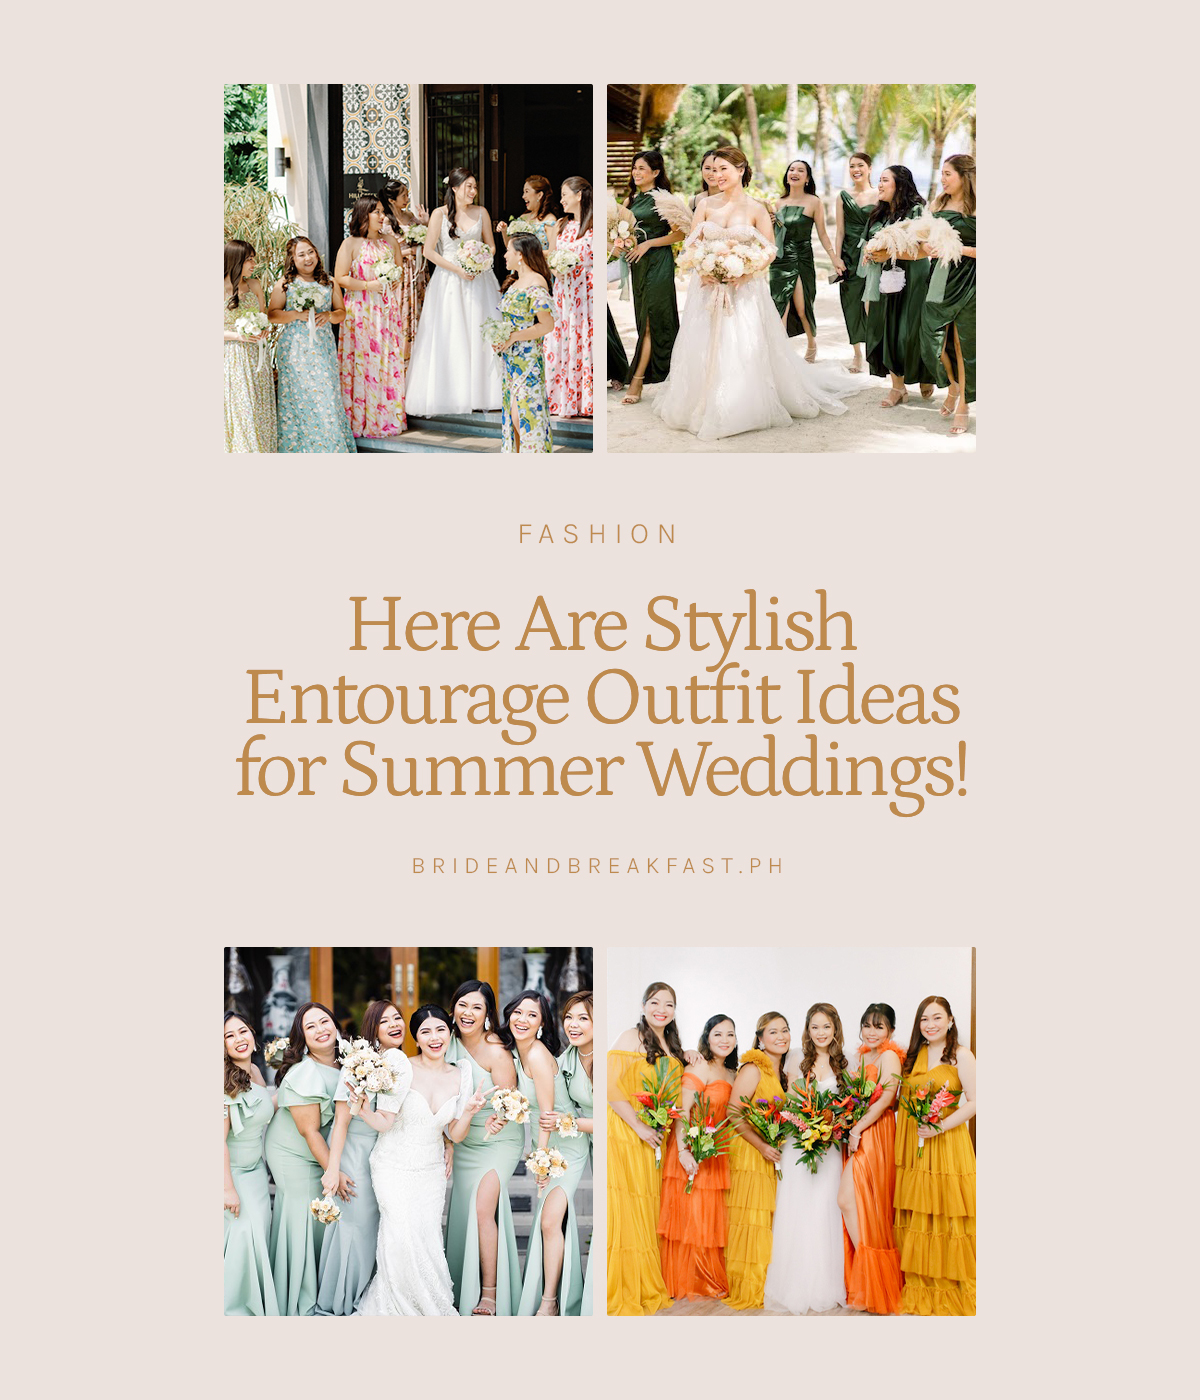 Here Are Stylish Entourage Outfit Ideas for Summer Weddings